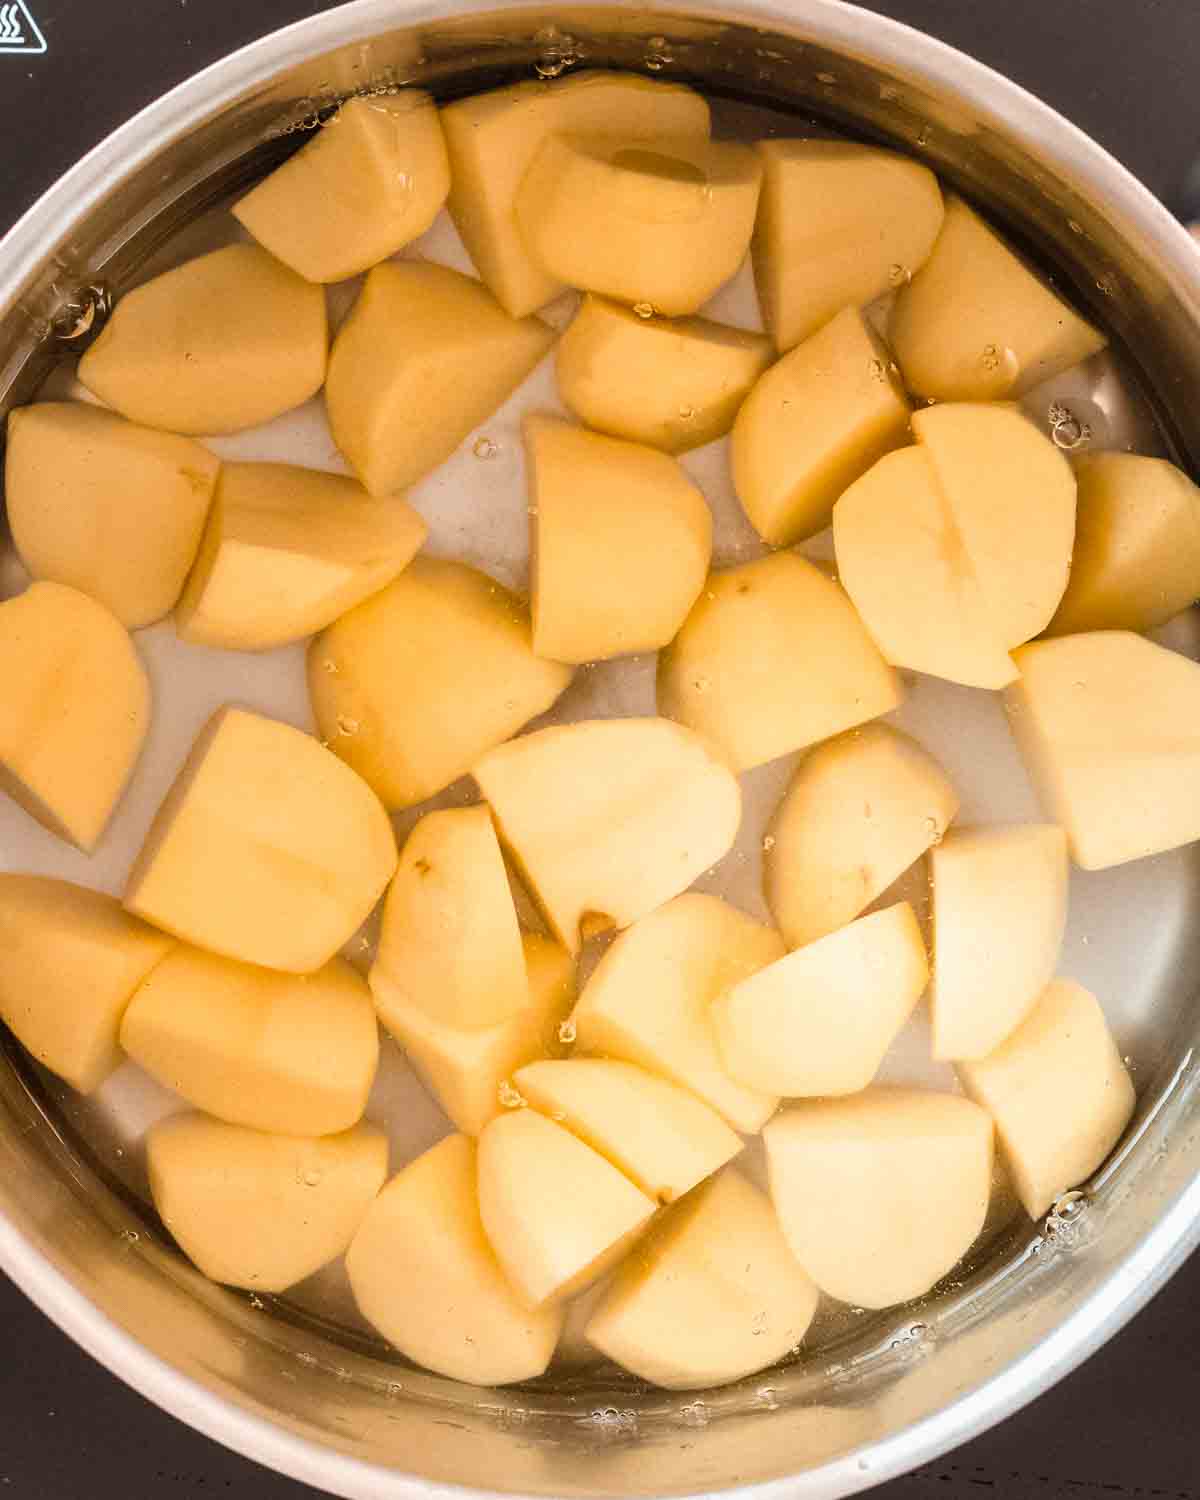 quartered potatotes in a pot with water.